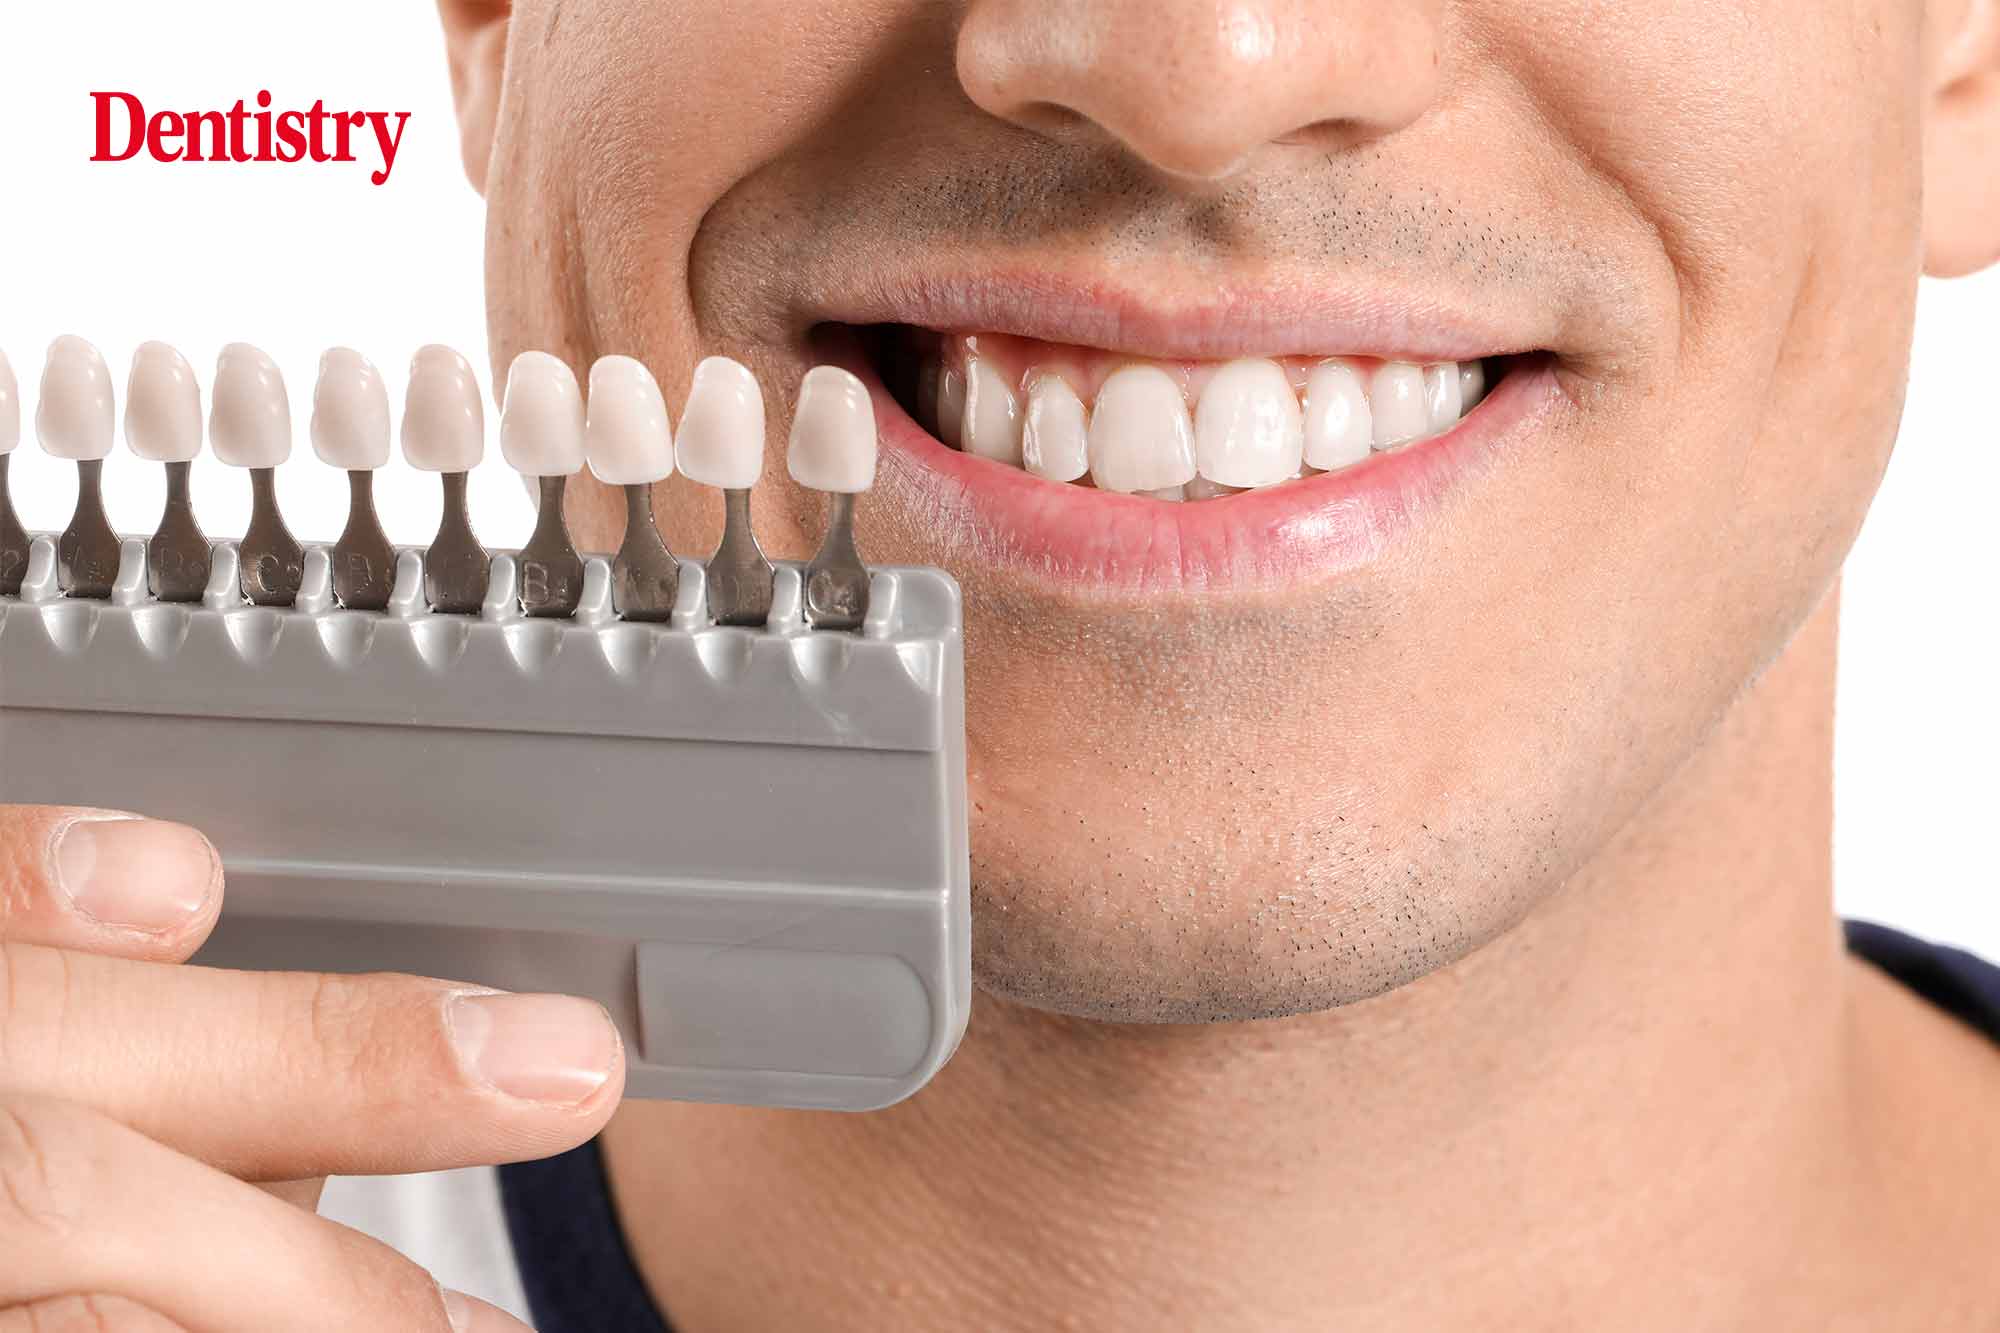 Almost 60% of teeth whiteners available online exceed the legal amount of hydrogen peroxide, an investigation into teeth whitening products reveals